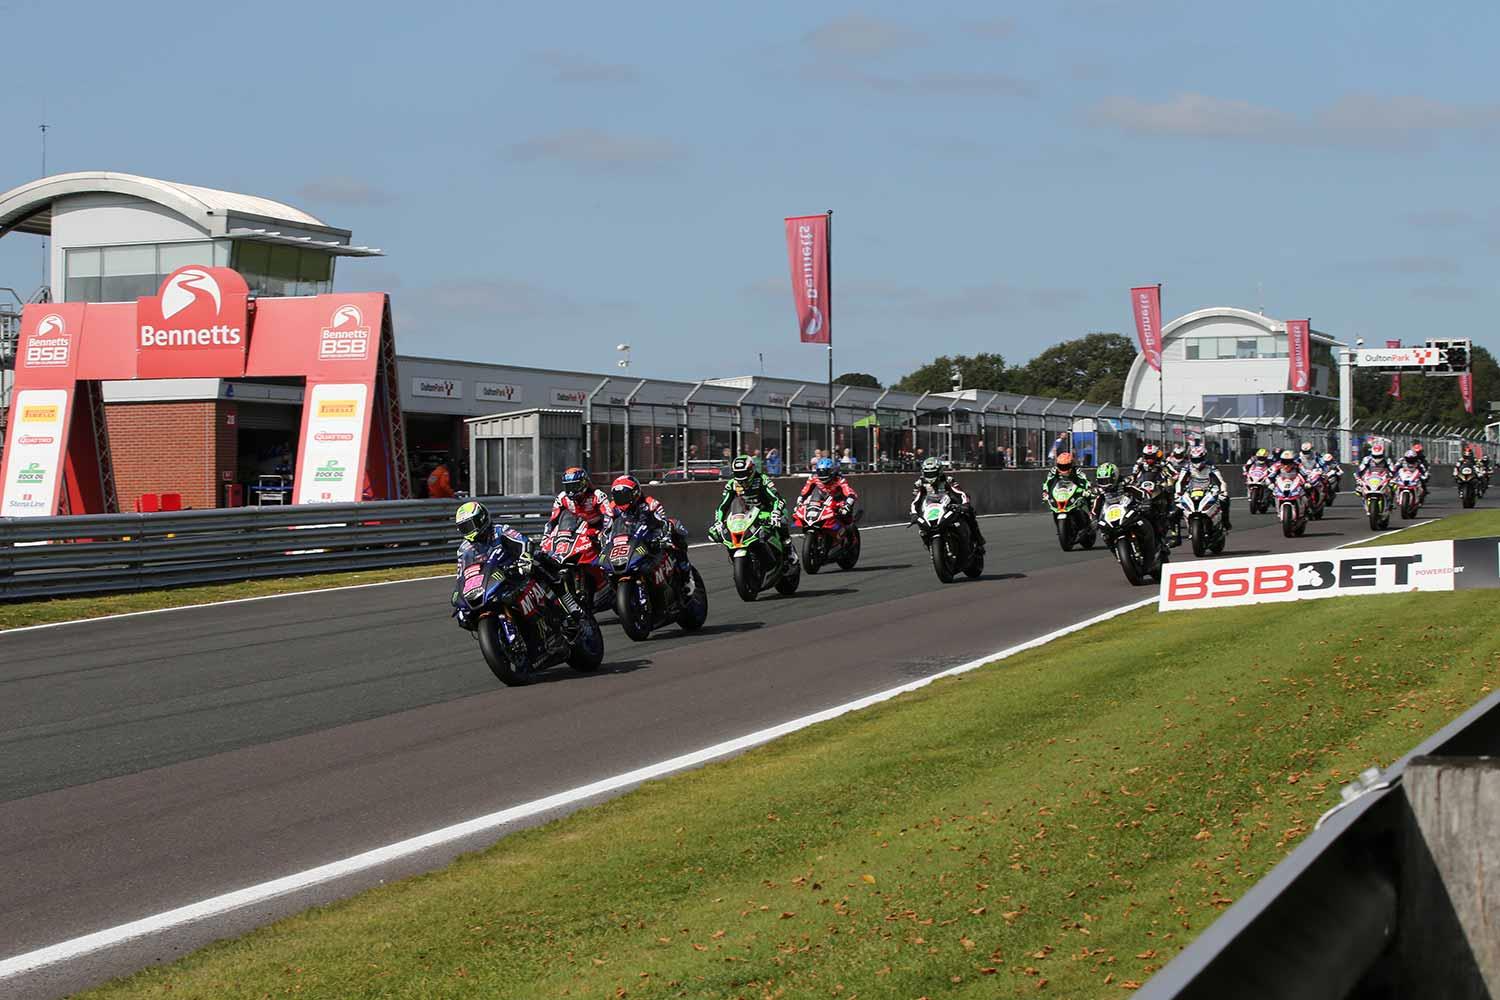 BSB: 2021 season pushed back in hope of fans being able to attend | MCN